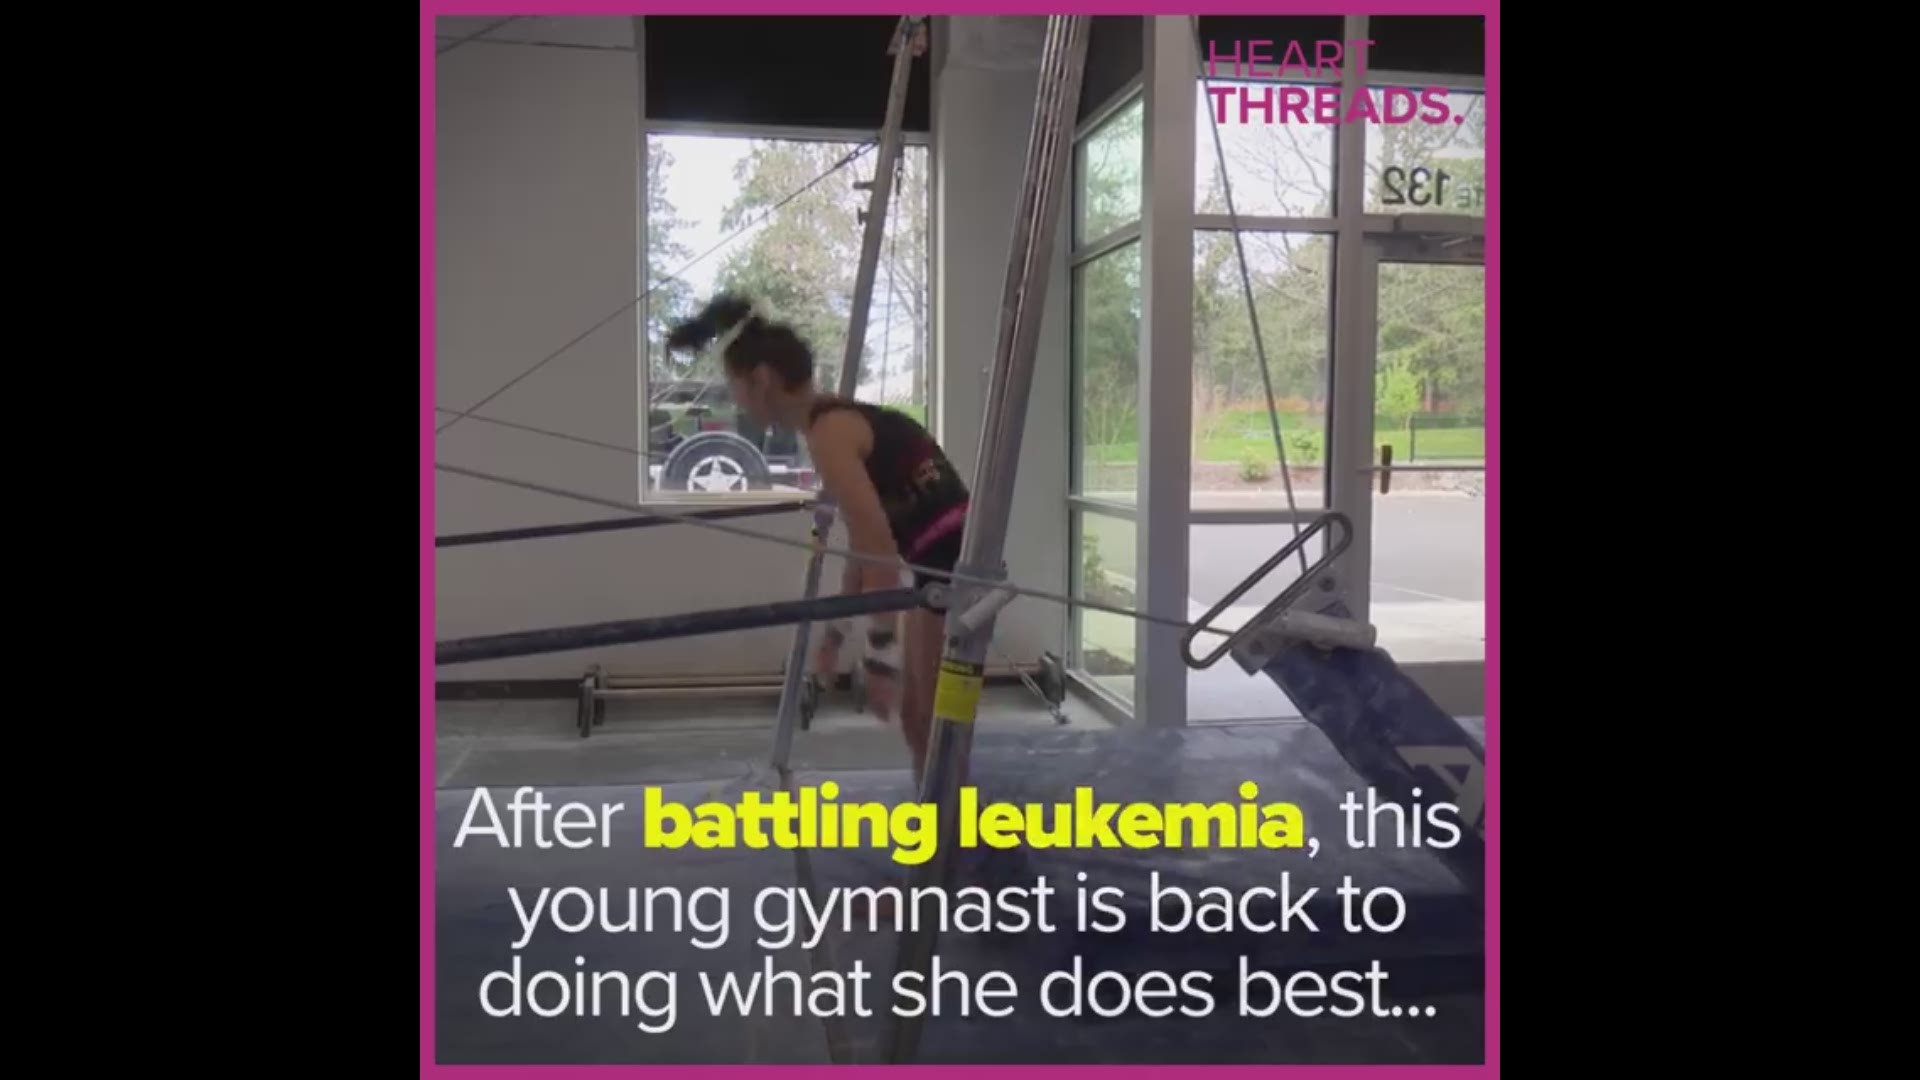 After a difficult battle with leukemia, this gymnast is inspiring her friends and family by competing once again.